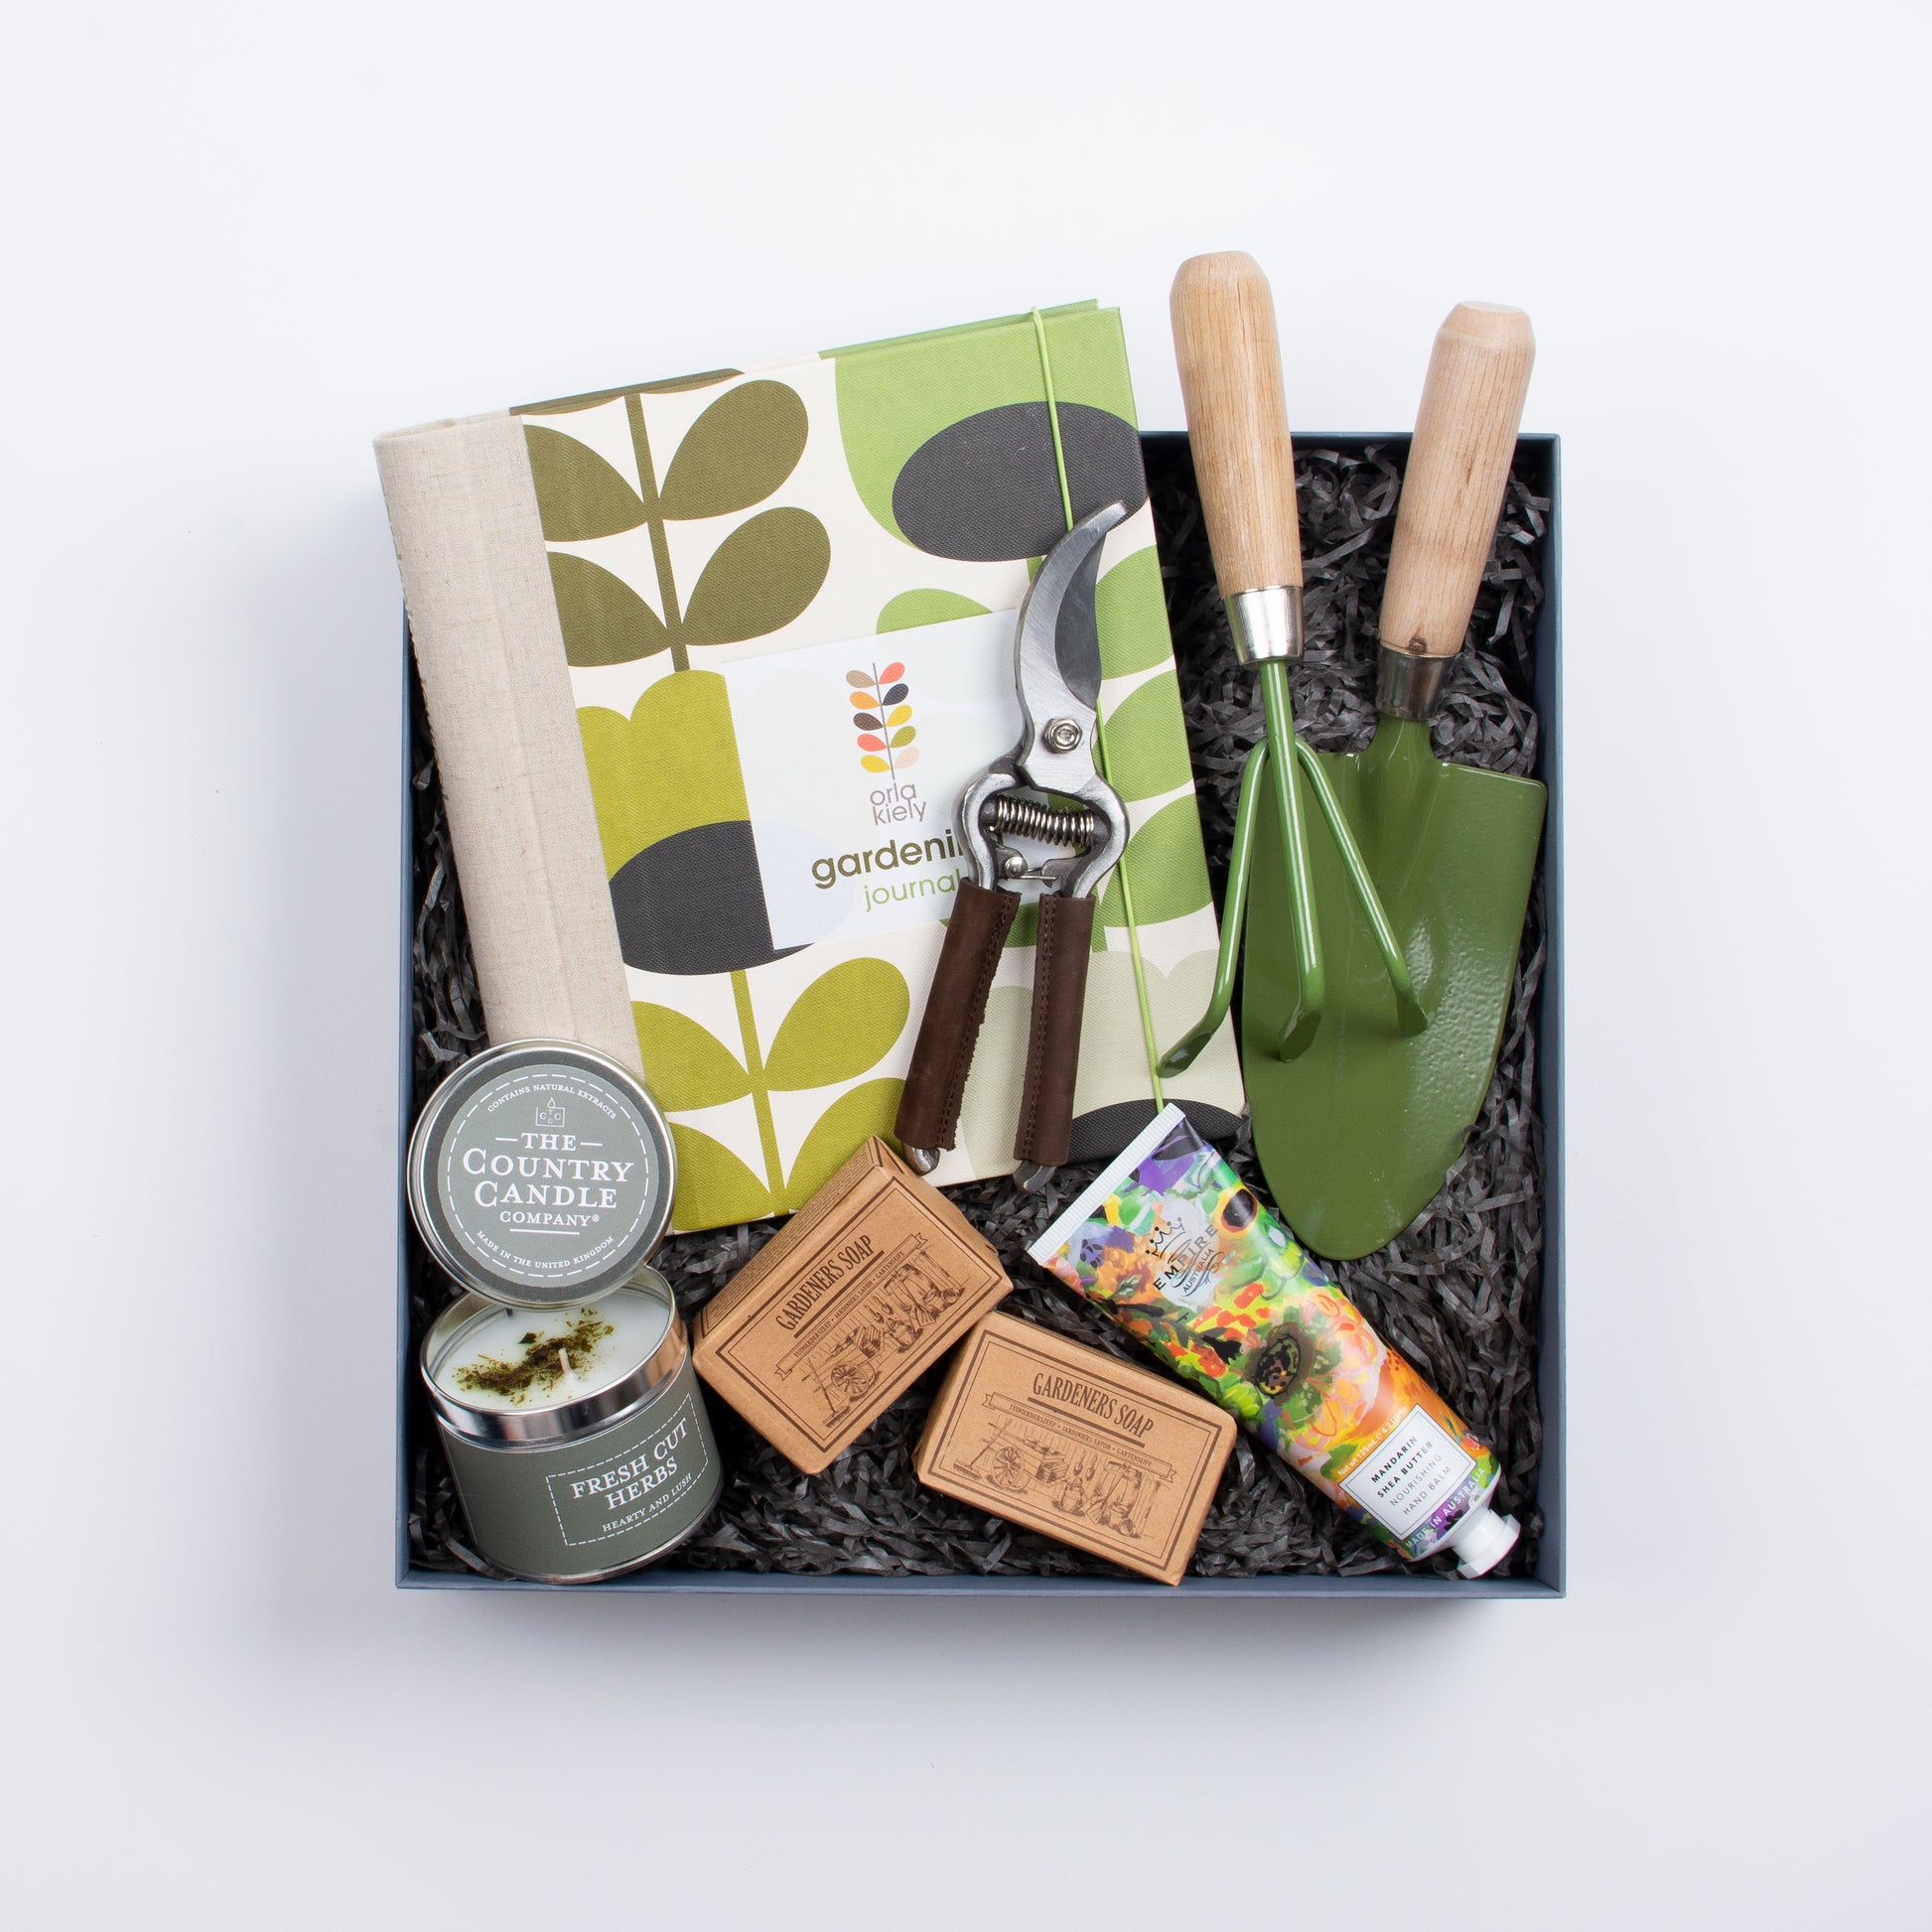 Gift box contains book, gardening fork and spade, two soaps, candle, hand cream, pruner.